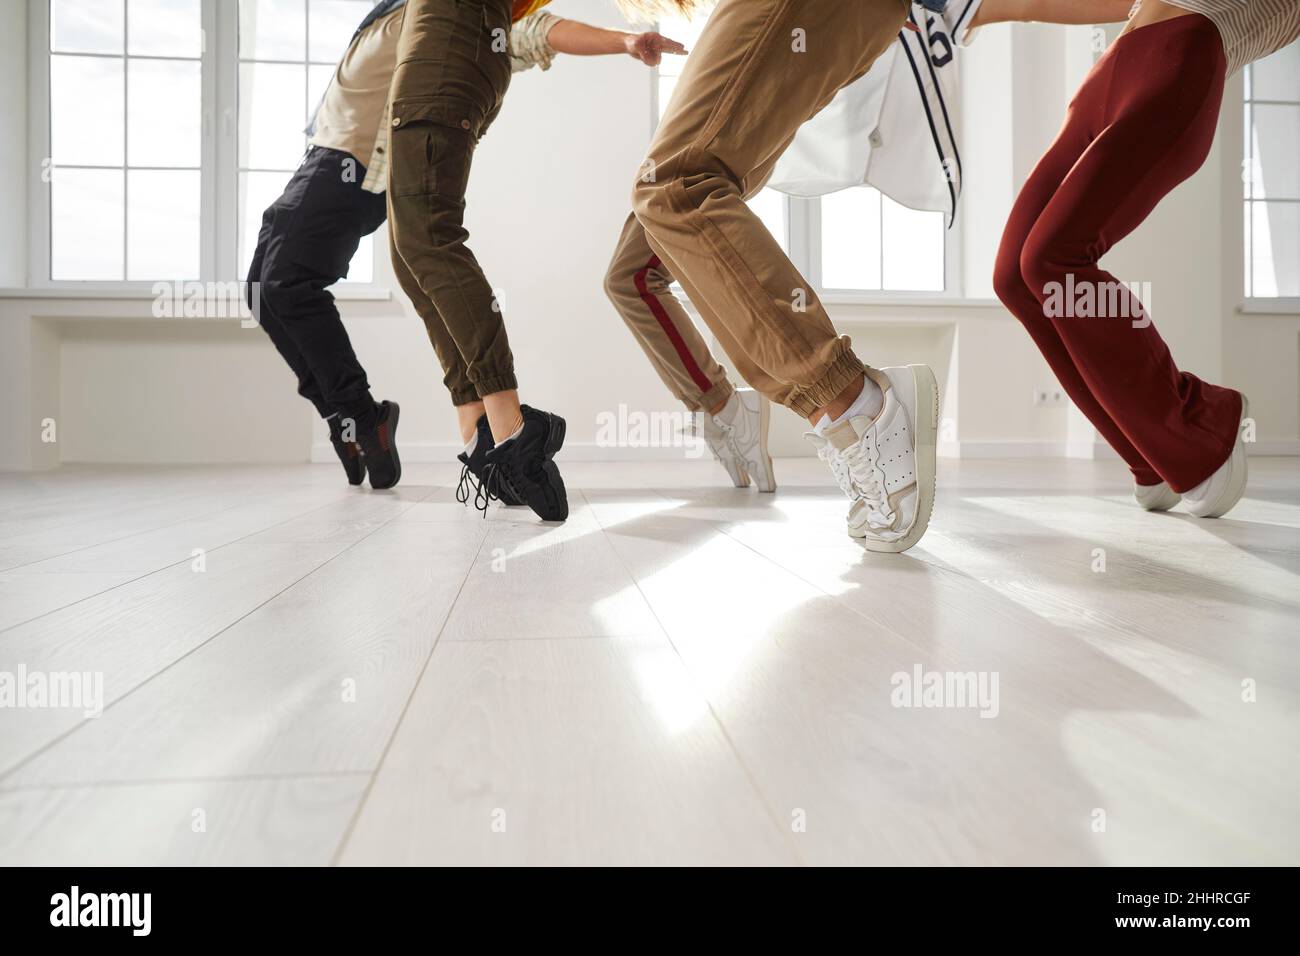 Group of hip hop dancers who together perform stand on toes during rehearsal in dance studio. Stock Photo